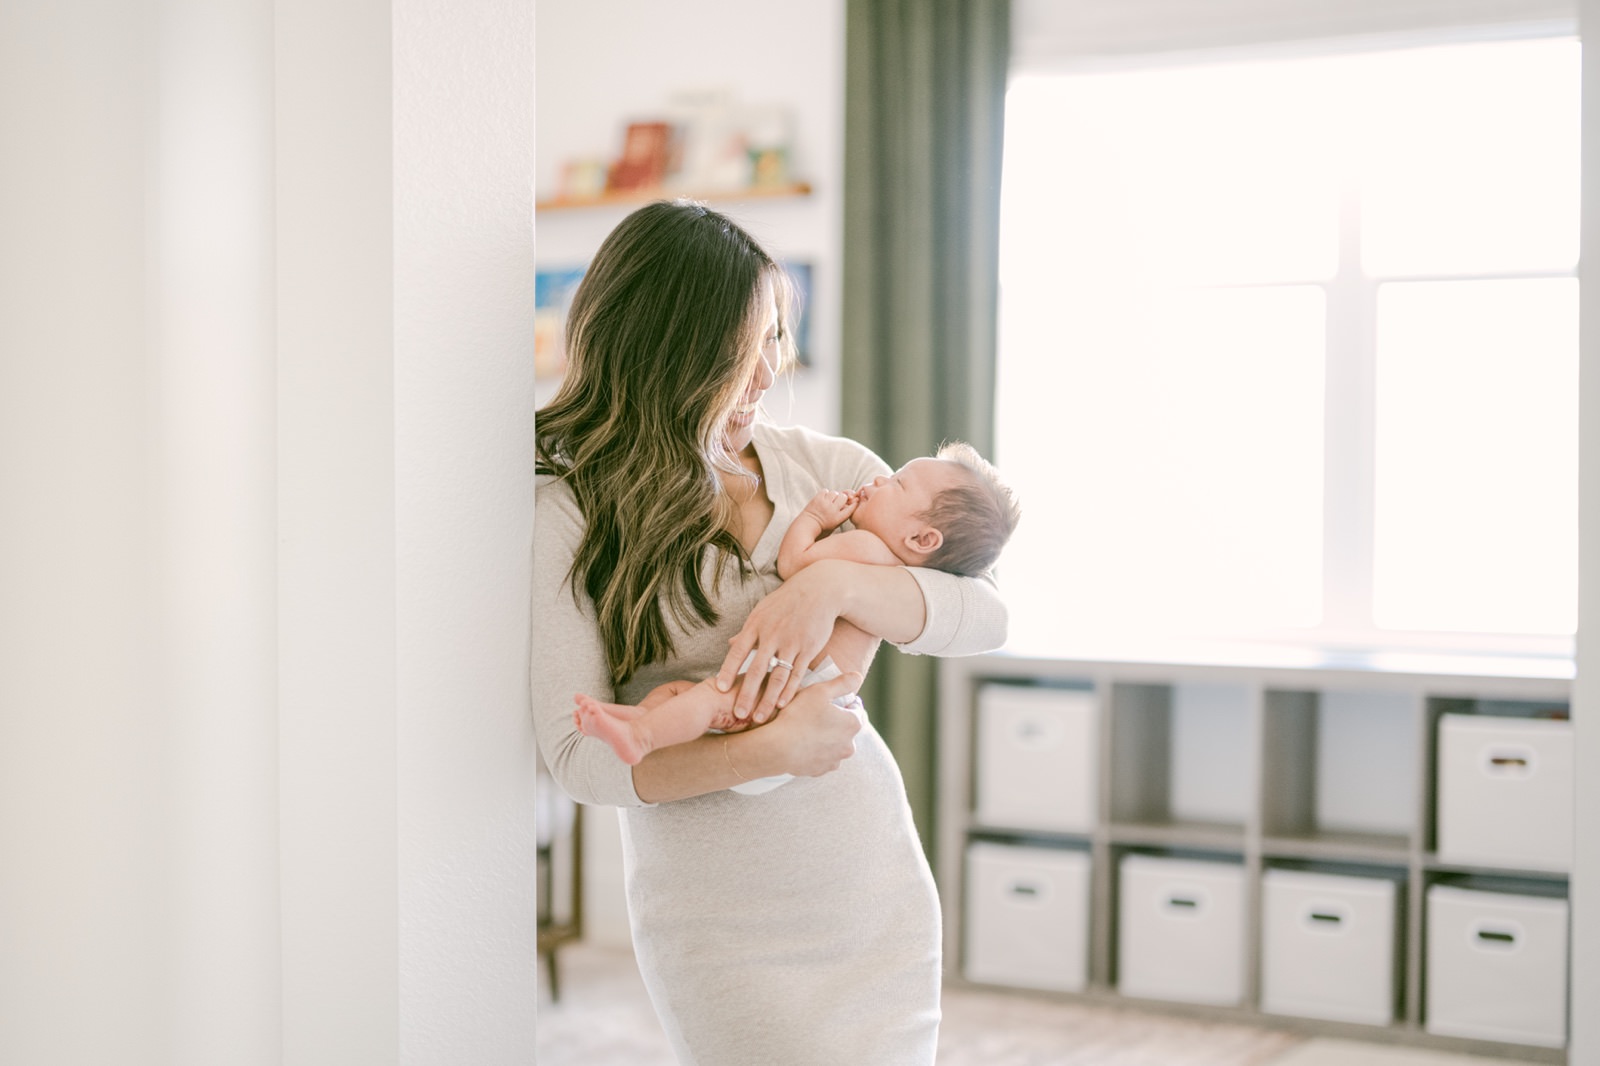 Tender moment shared between Denver mom and her older newborn baby during a photoshoot